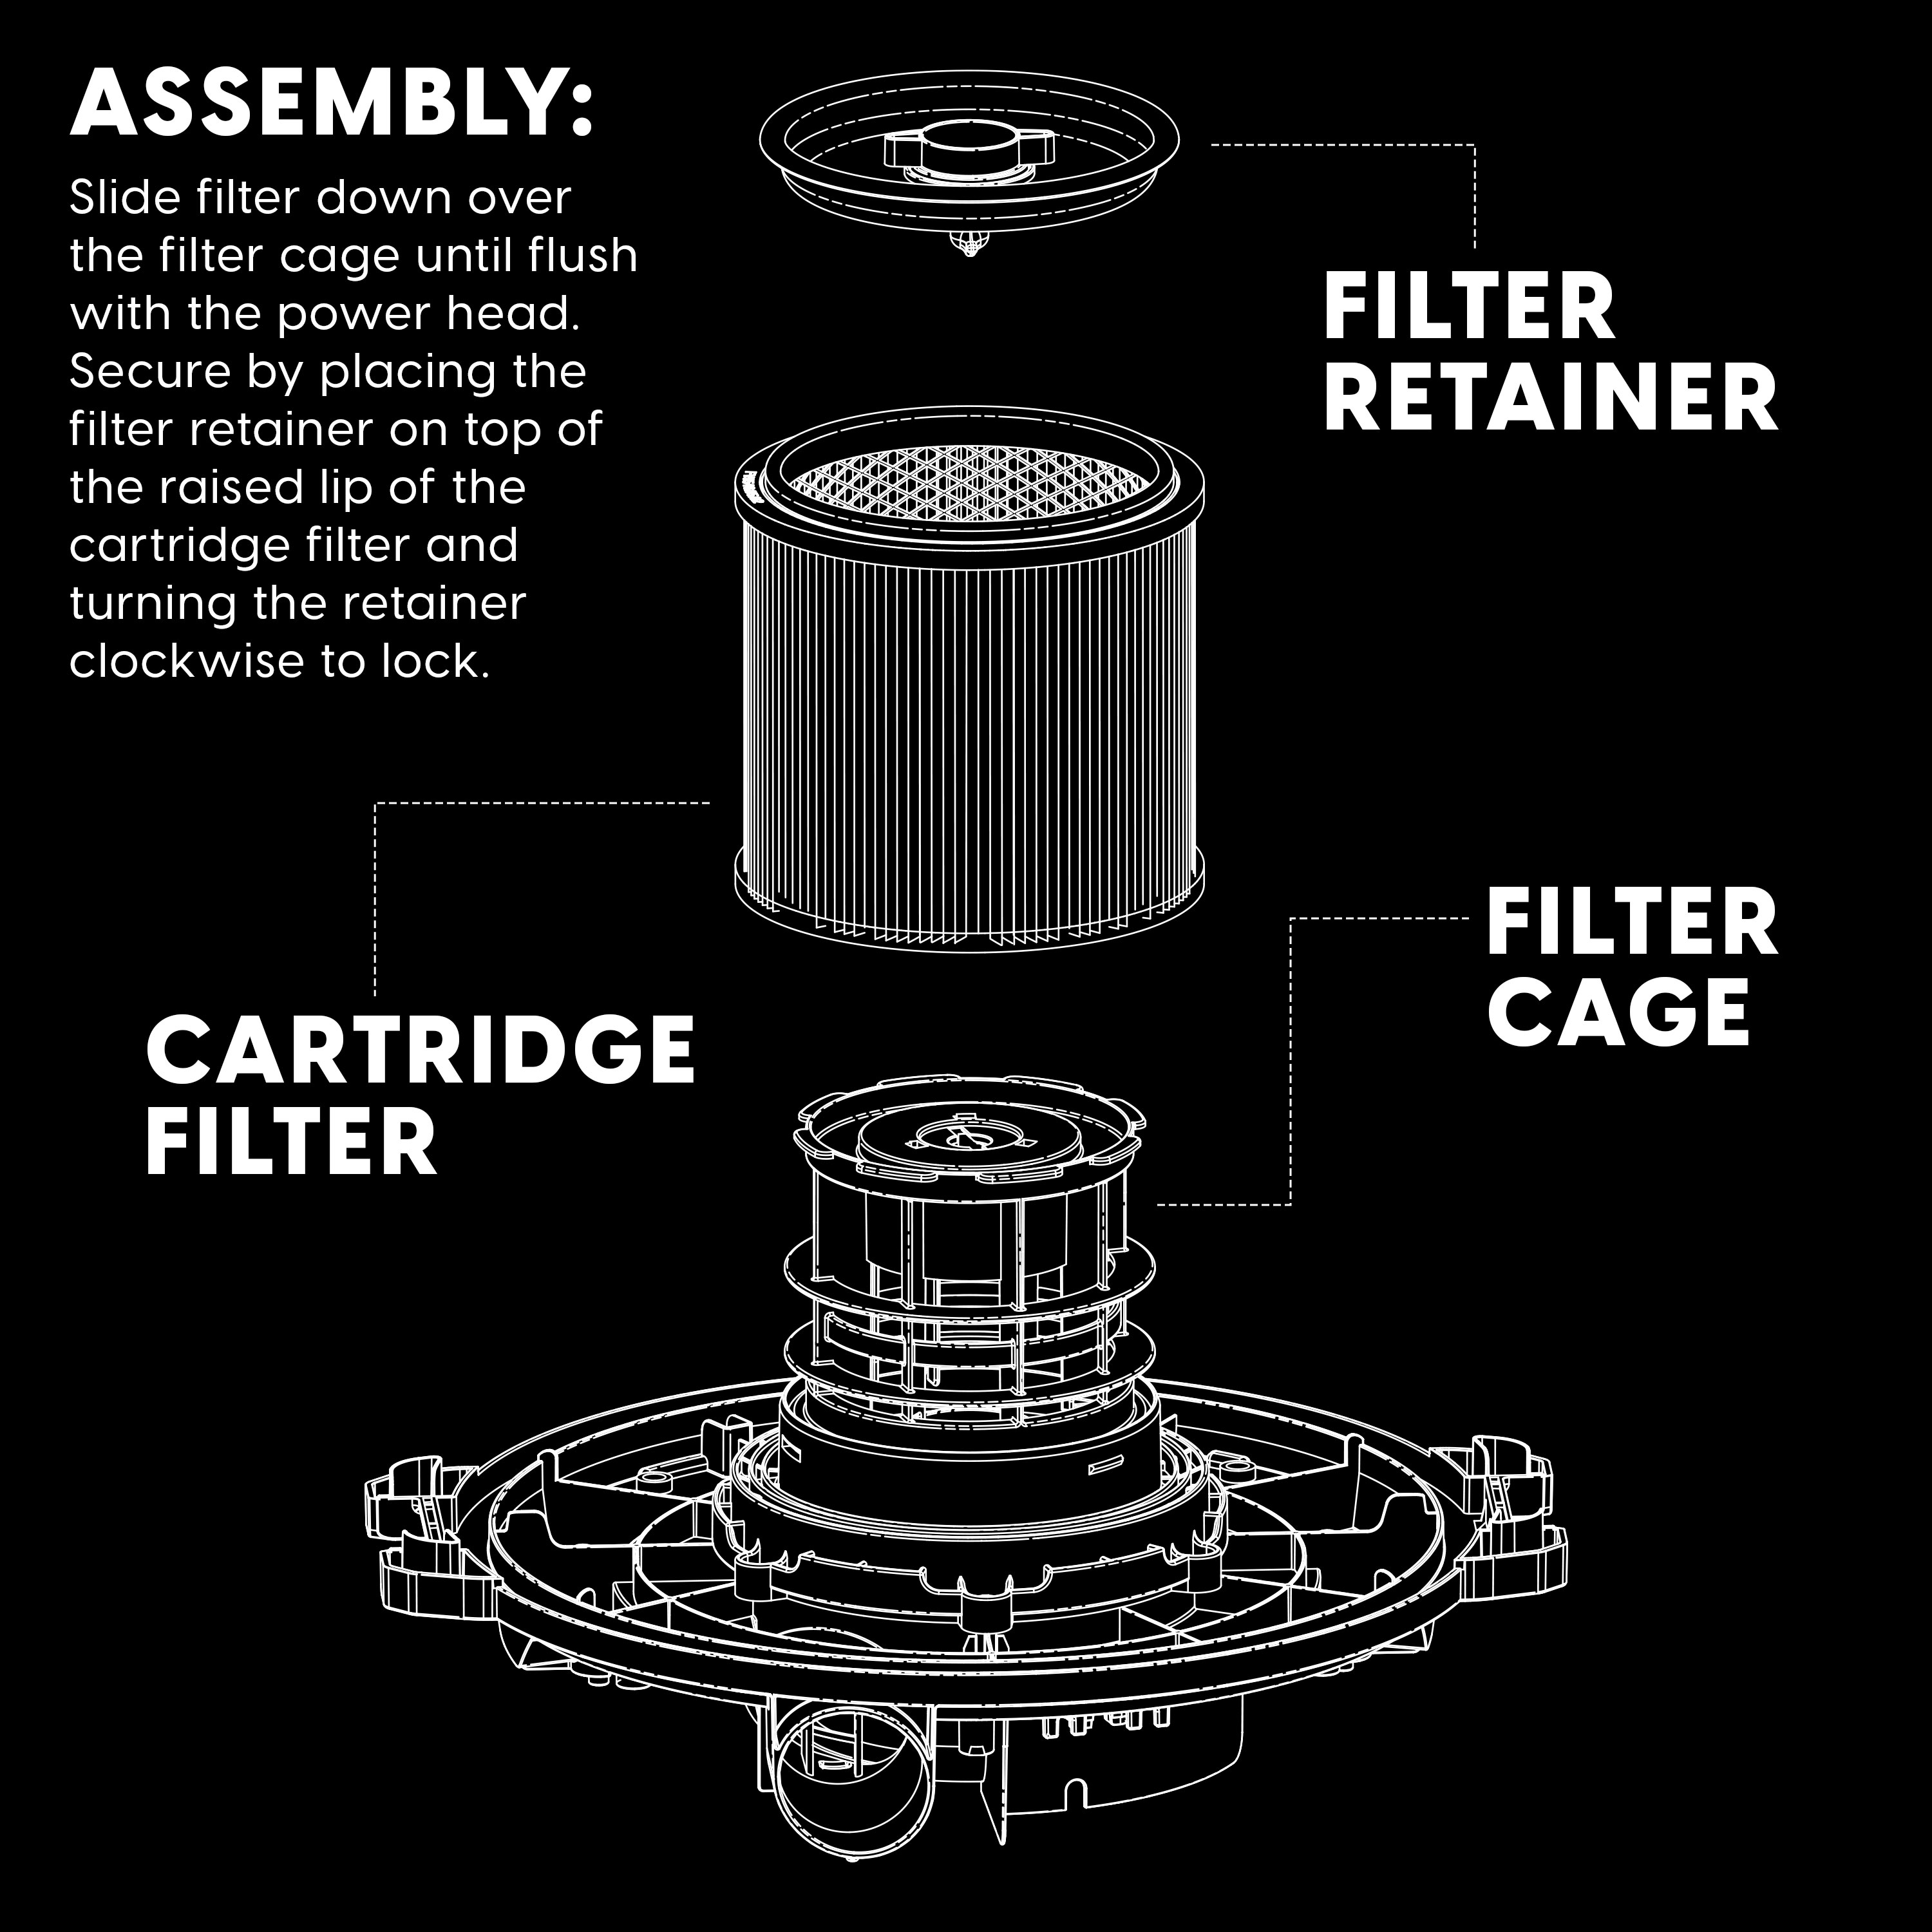 Retainer Fine HEPA (works Dust and Cartridge with Vacmaster Material Shop-Vac) Filter